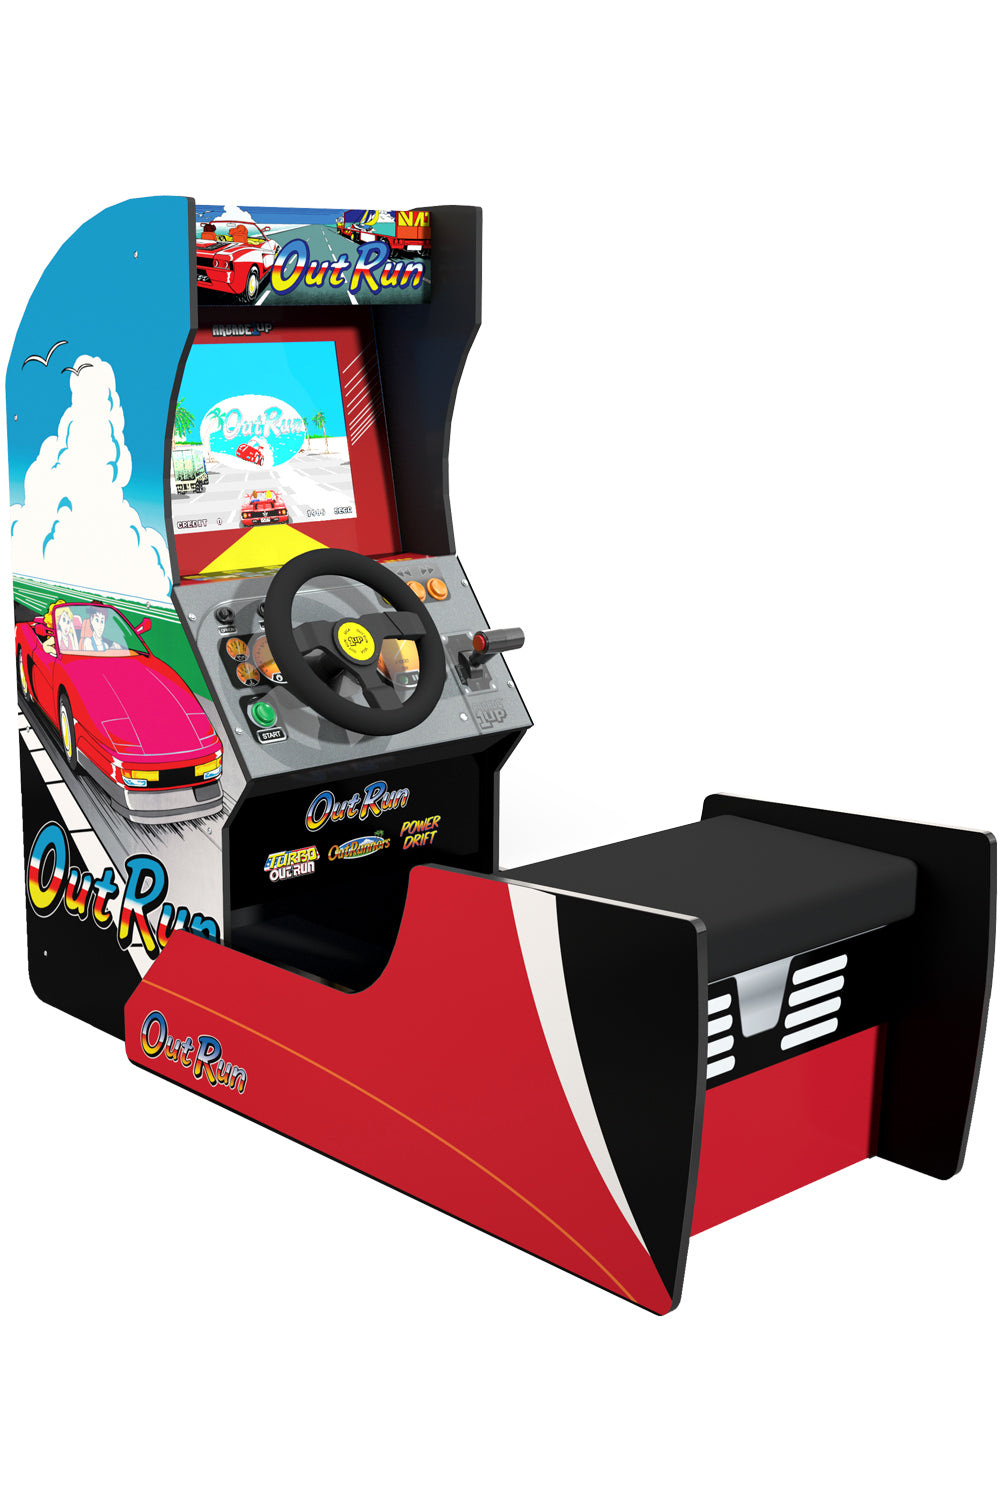 Outrun Seated Arcade Cabinet Arcade1up